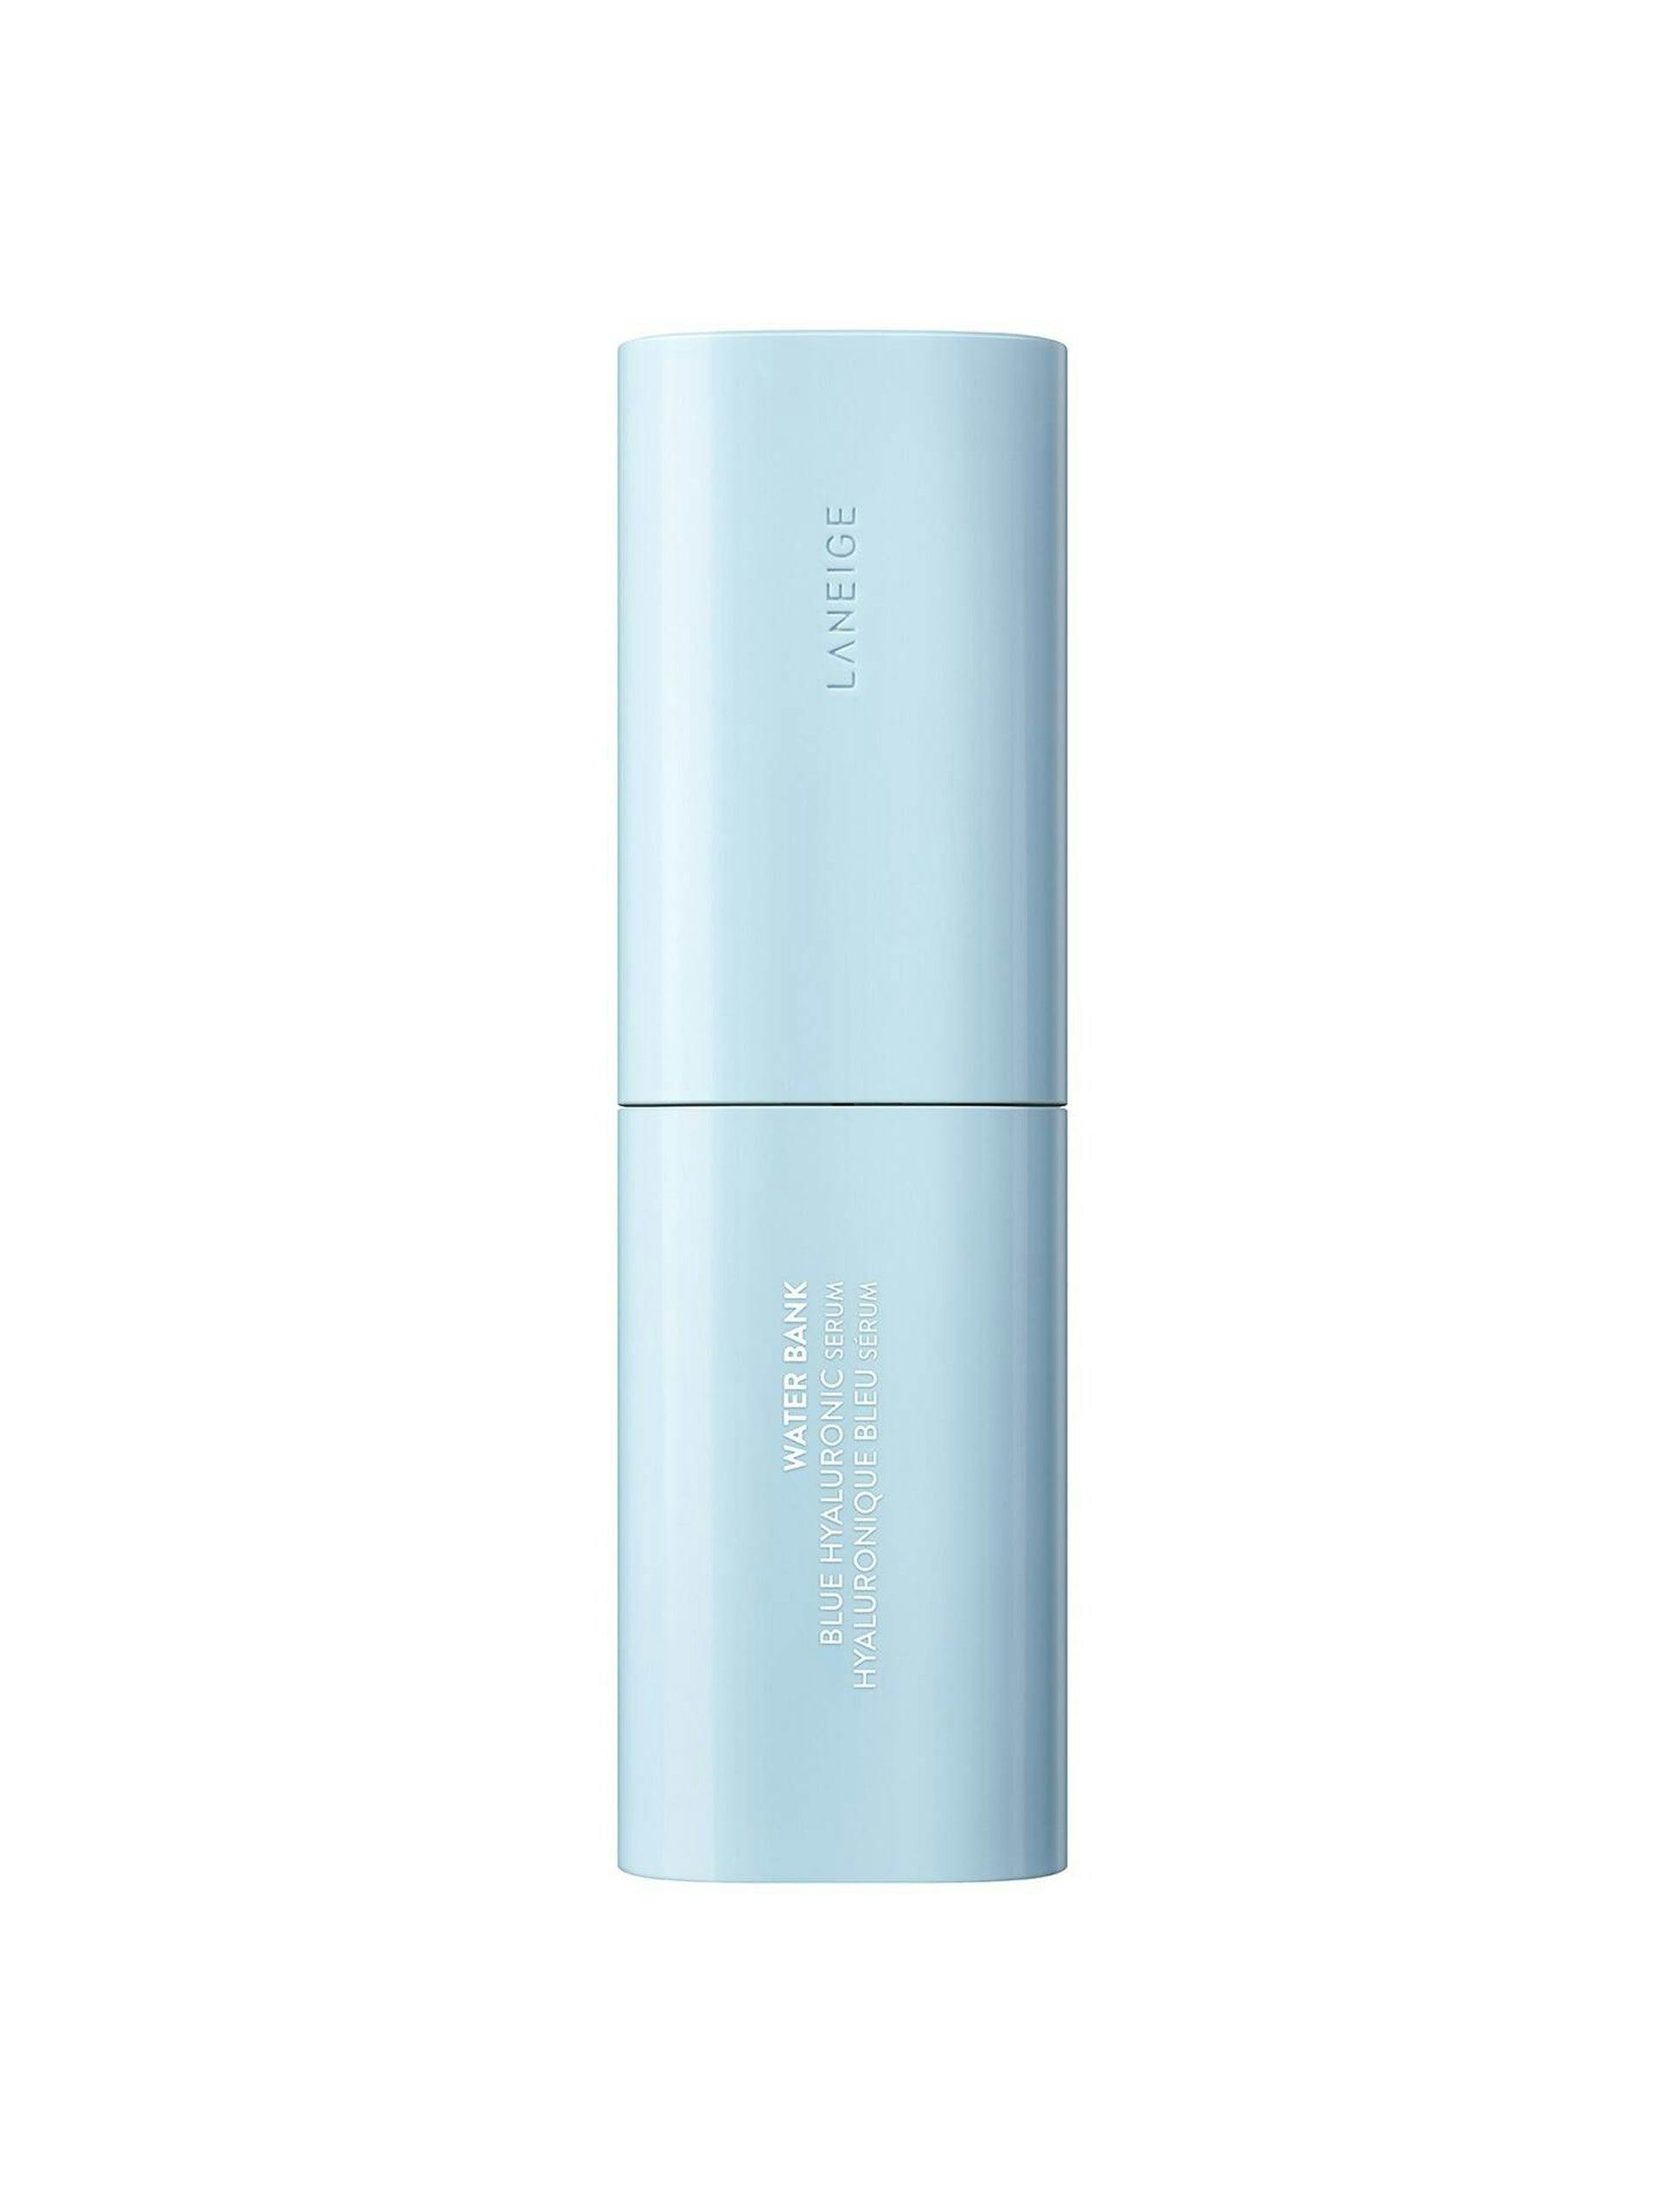 Water Bank hydrating essence